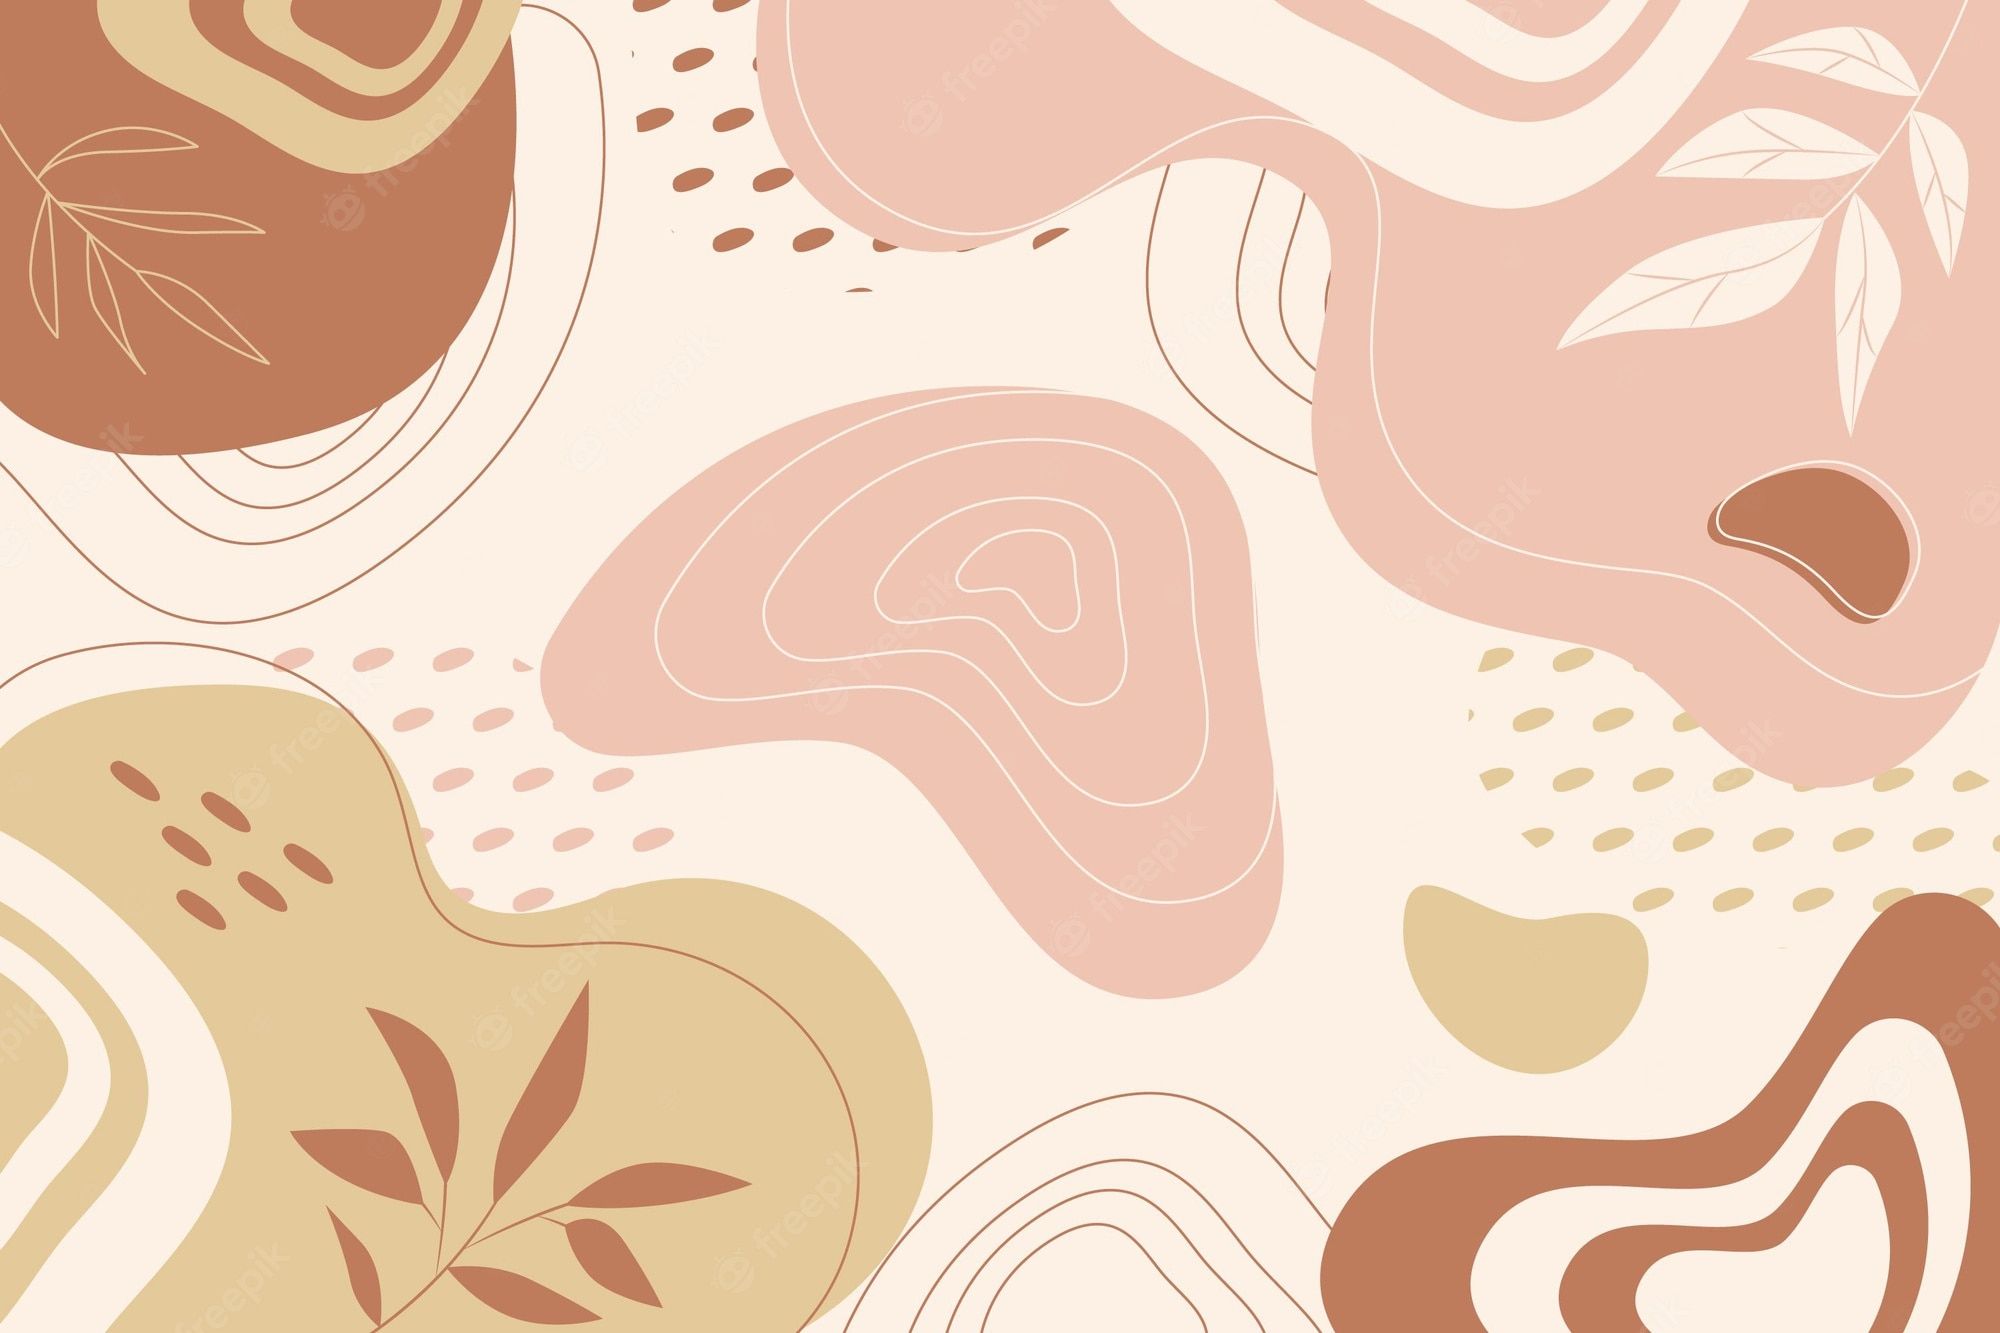 An abstract design with leaves and shapes in brown and beige - Abstract